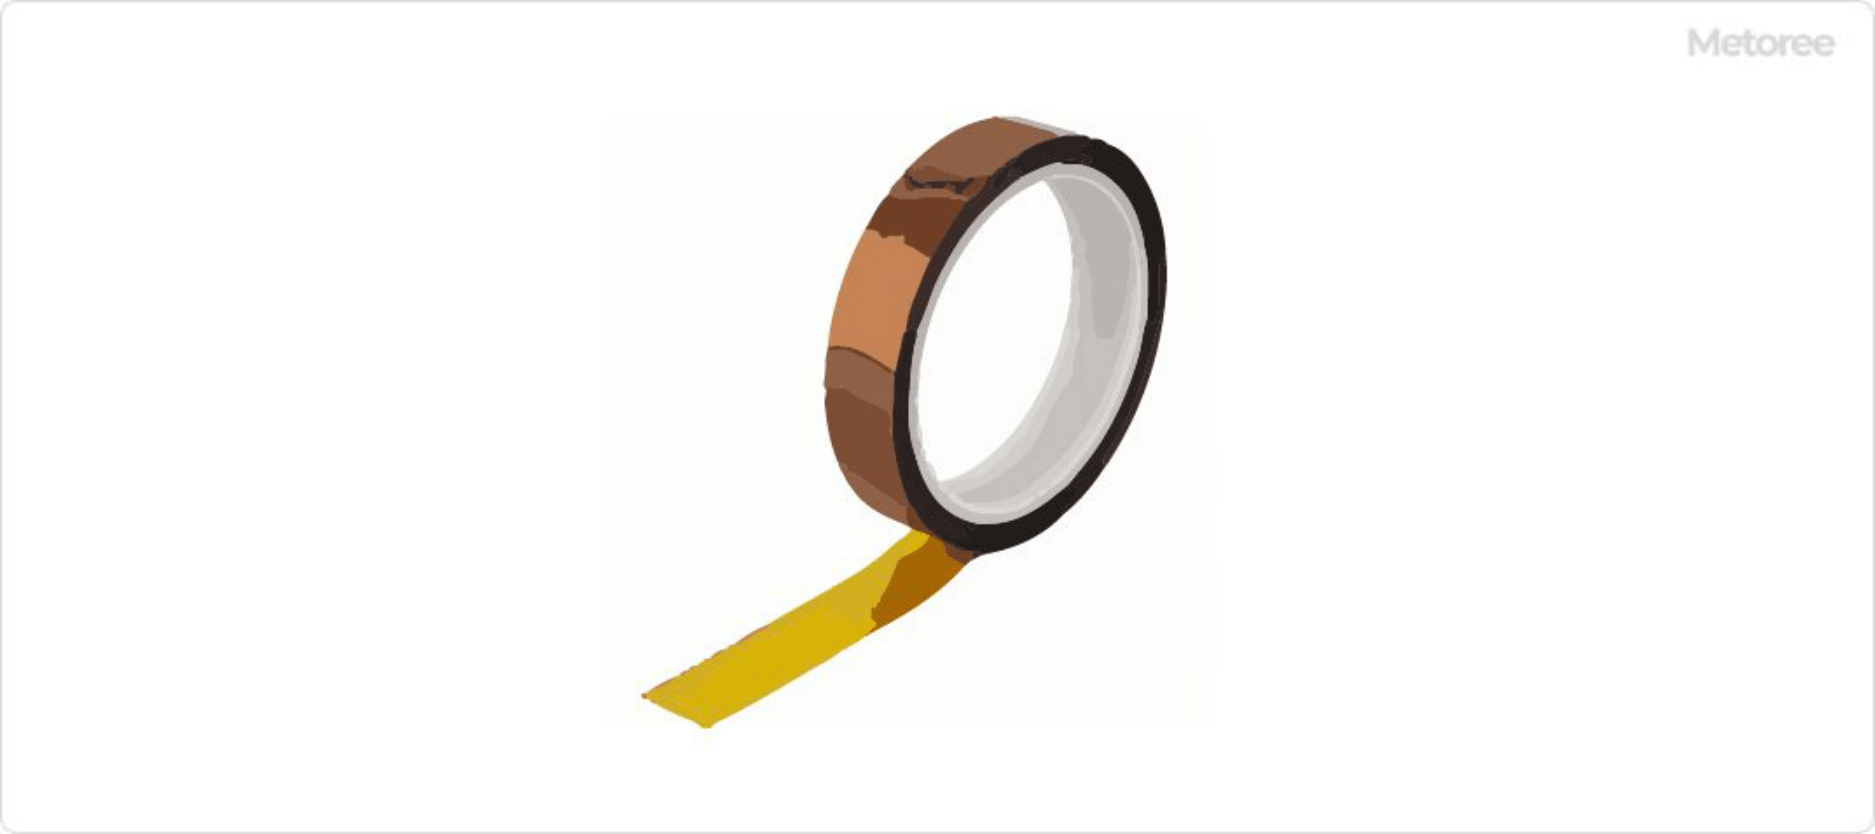 Thermal Interface Insulation Materials Conductive Tape For Heat  Manufacturers and Suppliers China - Factory Price - Naikos(Xiamen) Adhesive  Tape Co., Ltd